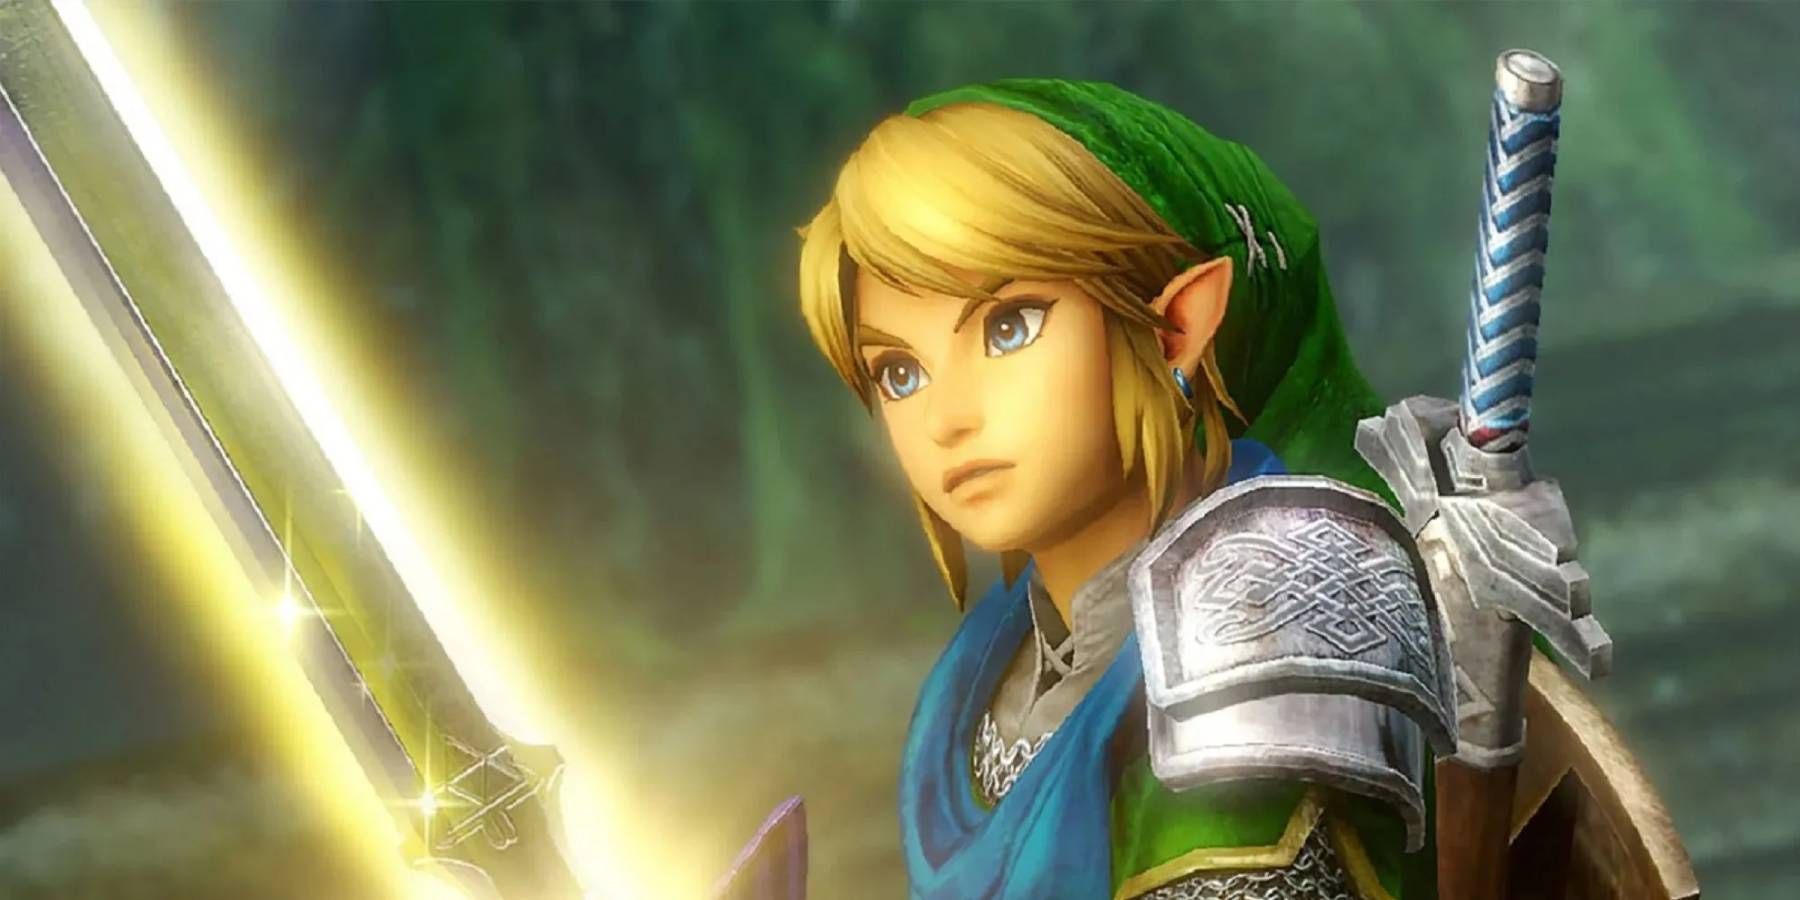 Link holding the Master Sword in Hyrule Warriors